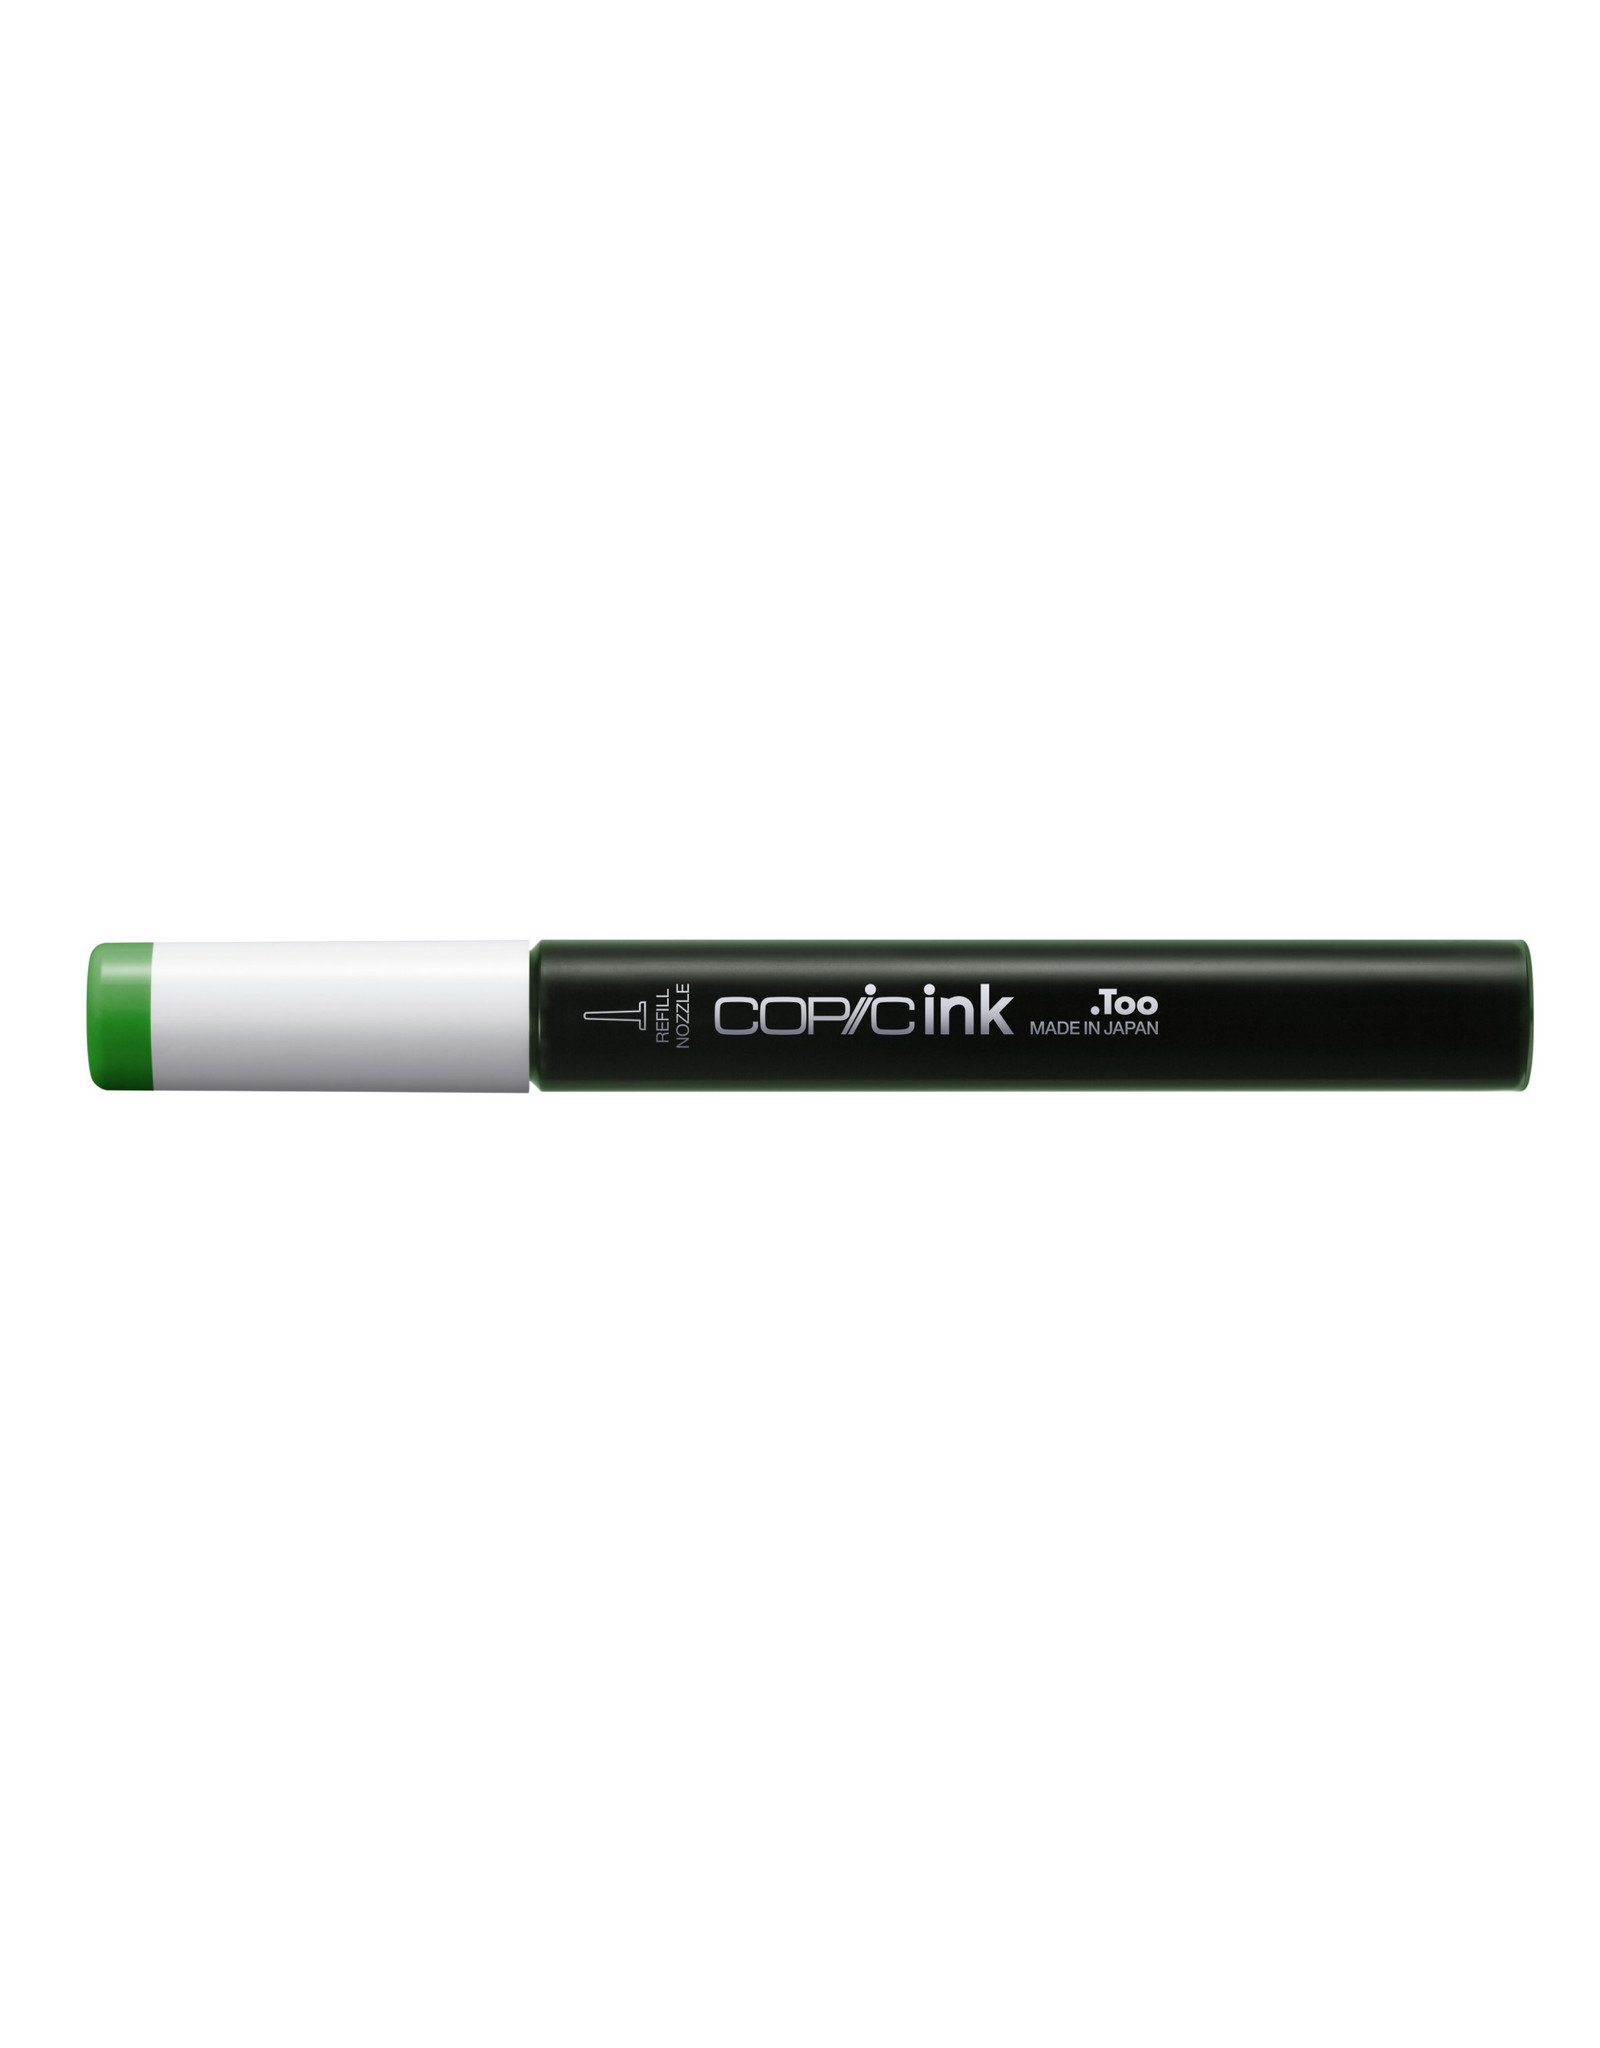 COPIC COPIC Ink 12ml G07 Nile Green